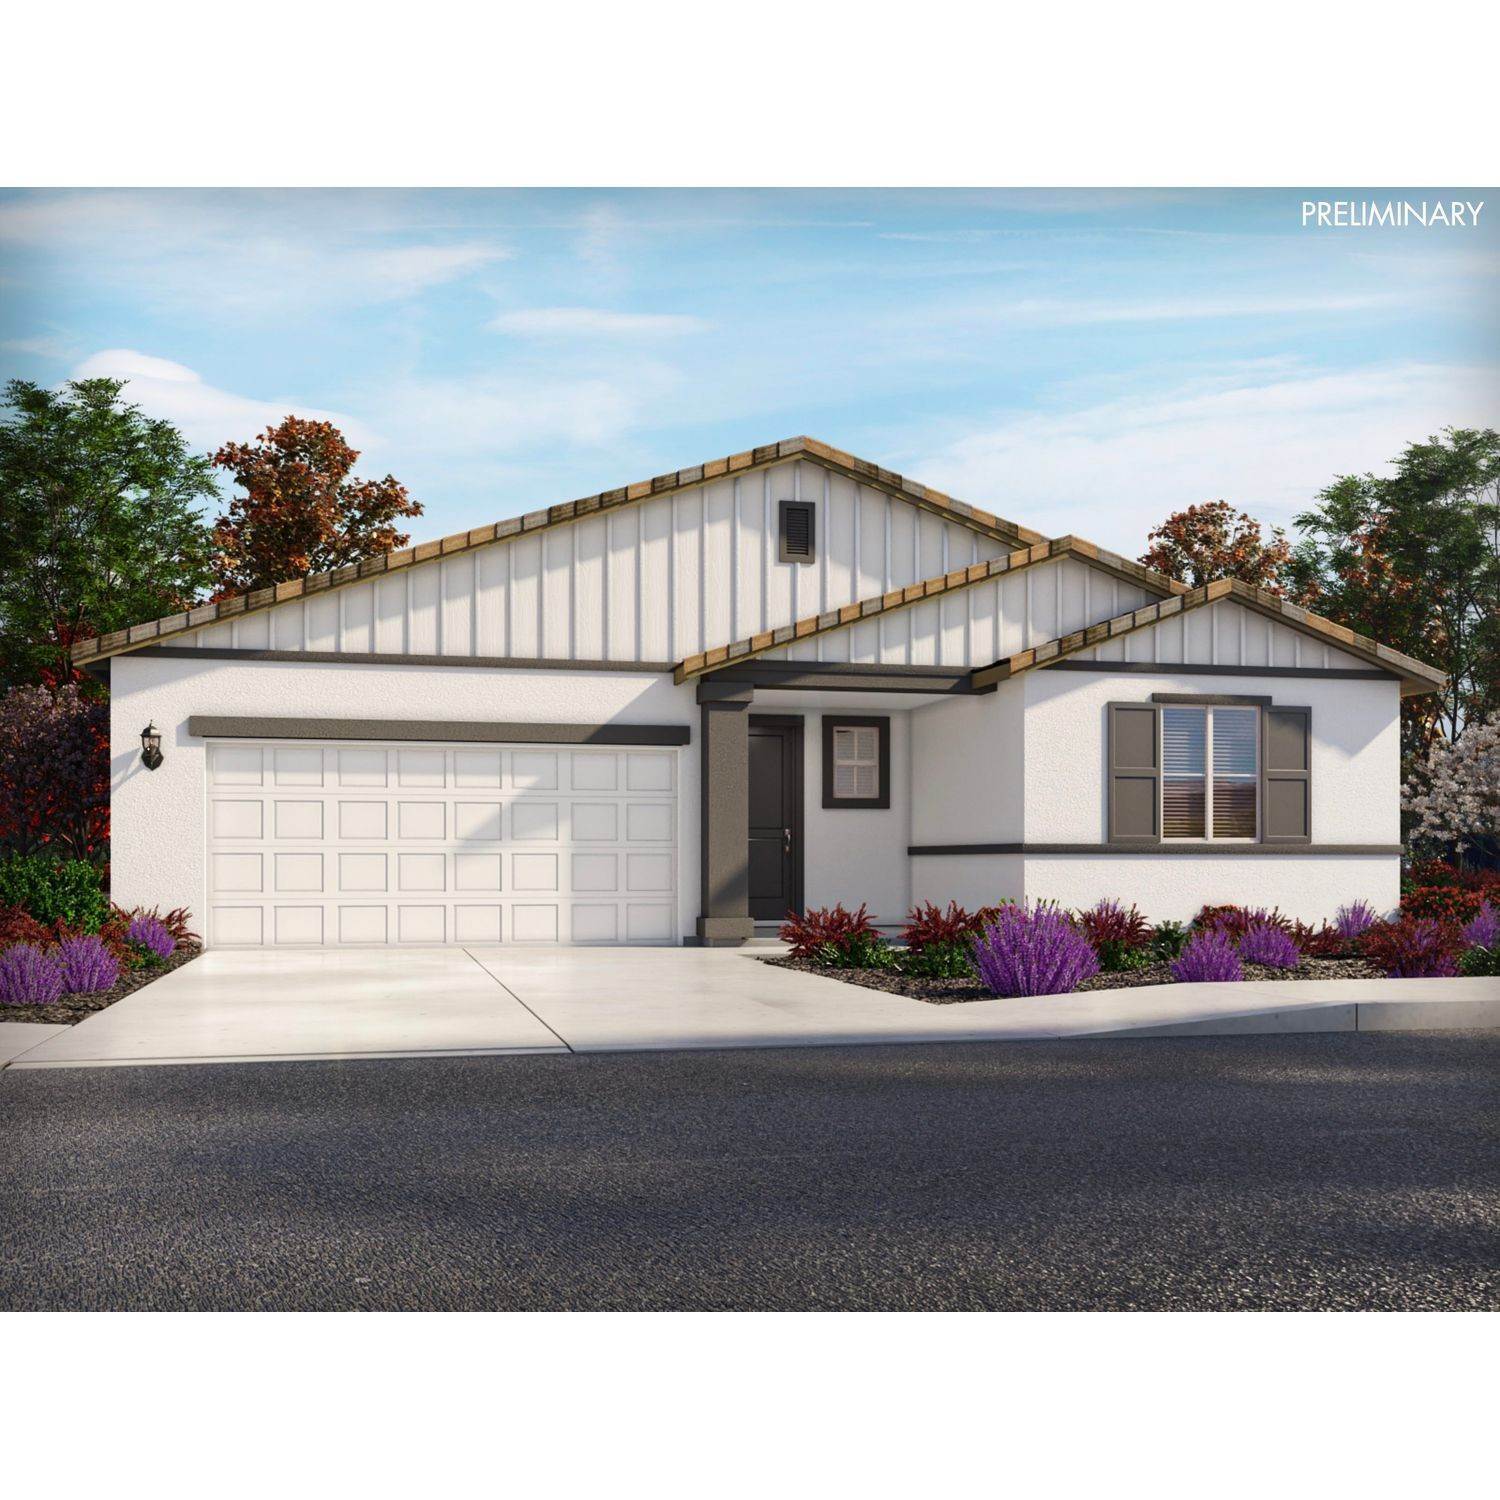 Single Family for Sale at Los Banos, CA 93635